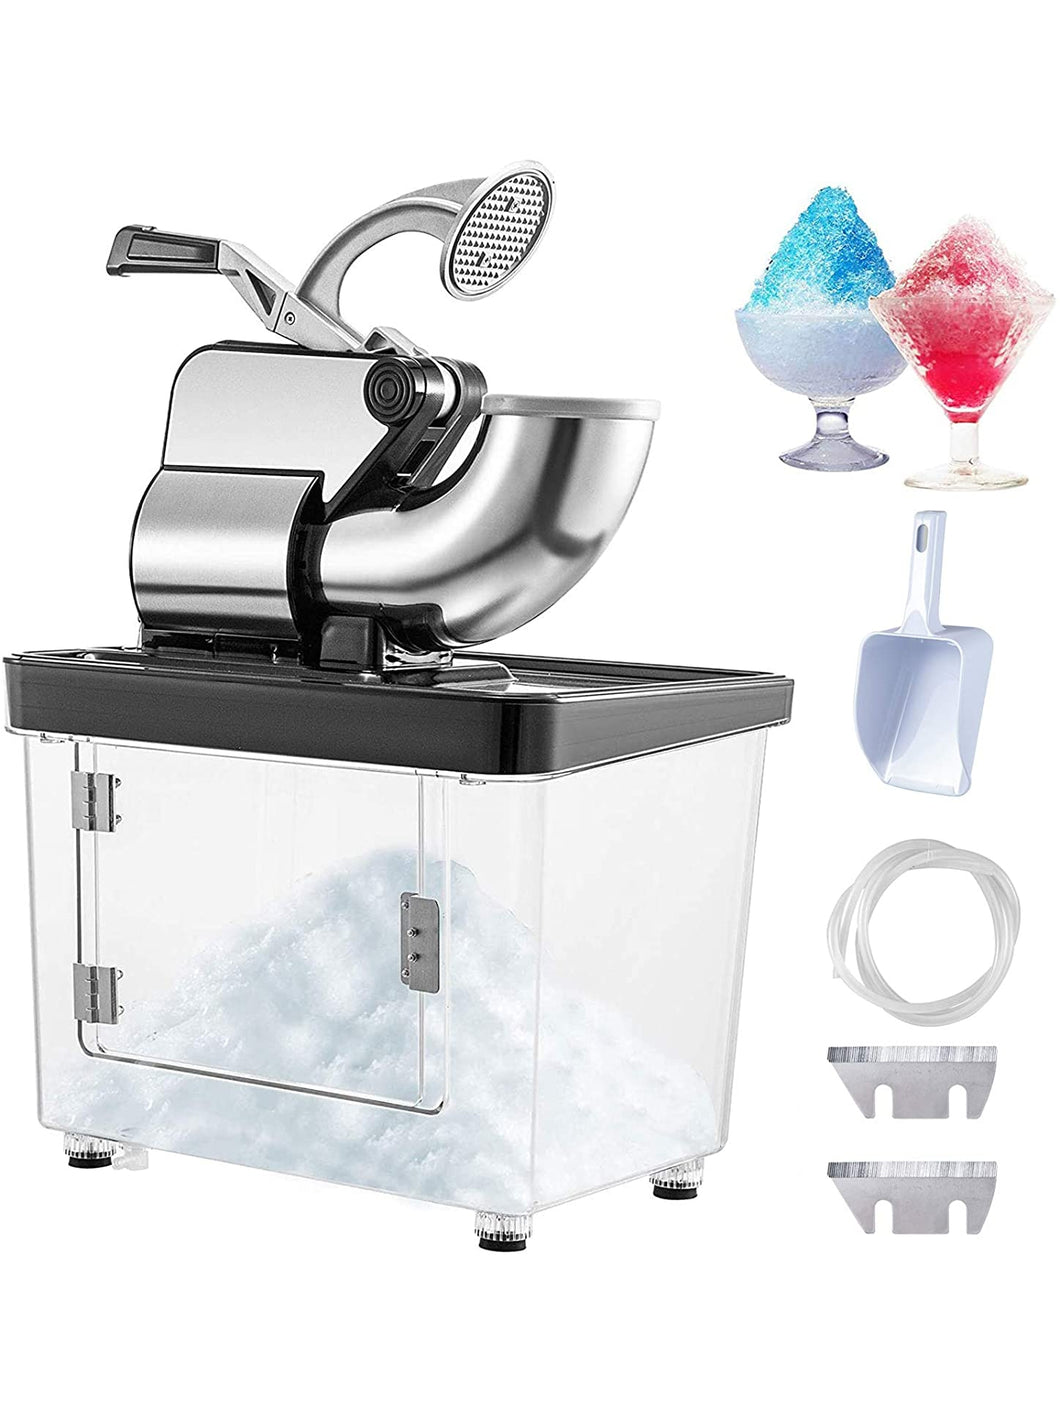 Snow Cone Machine, 50% deposit required within 3 days after order is made